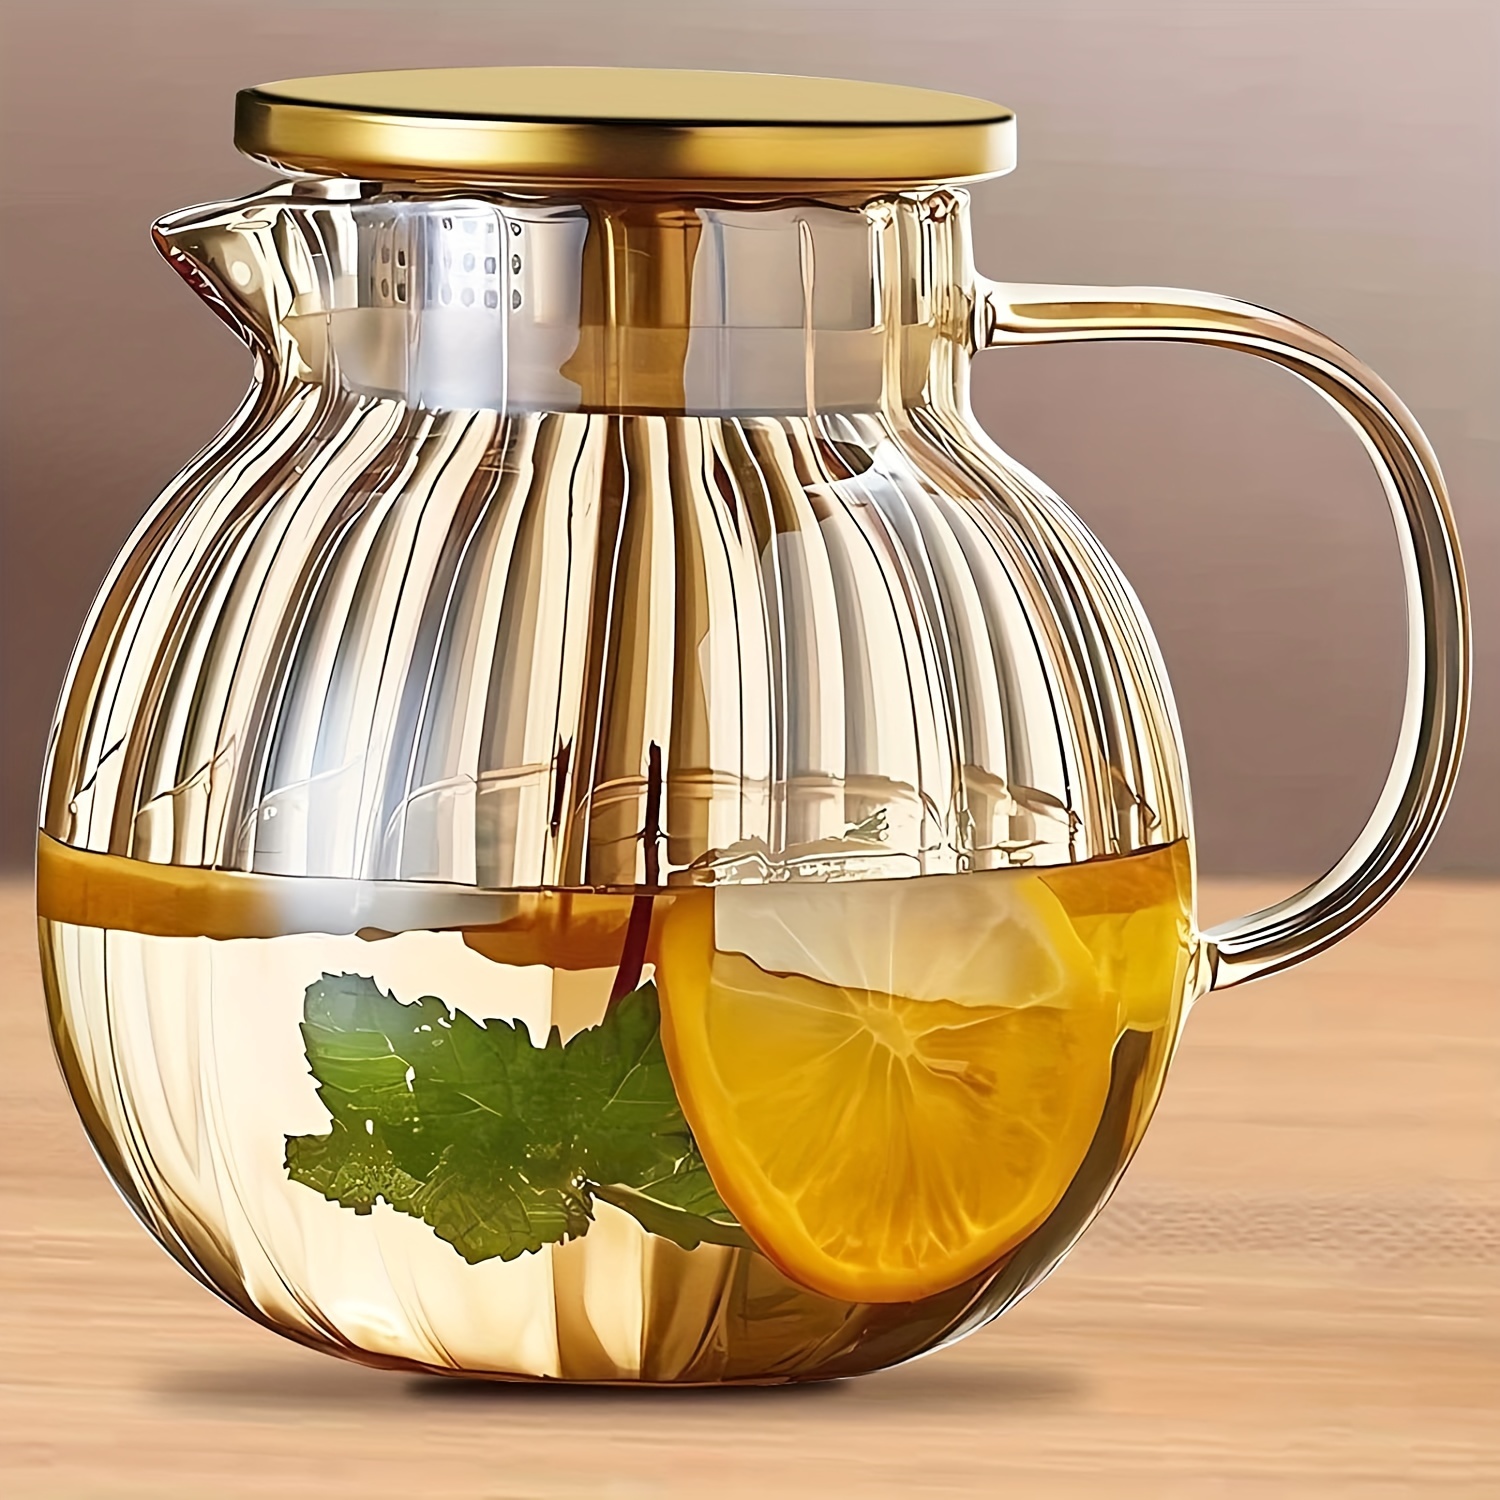 Heat Resistant Clear Glass Tea Serving Pitcher with Infuser Cha Hai Fair  Mug